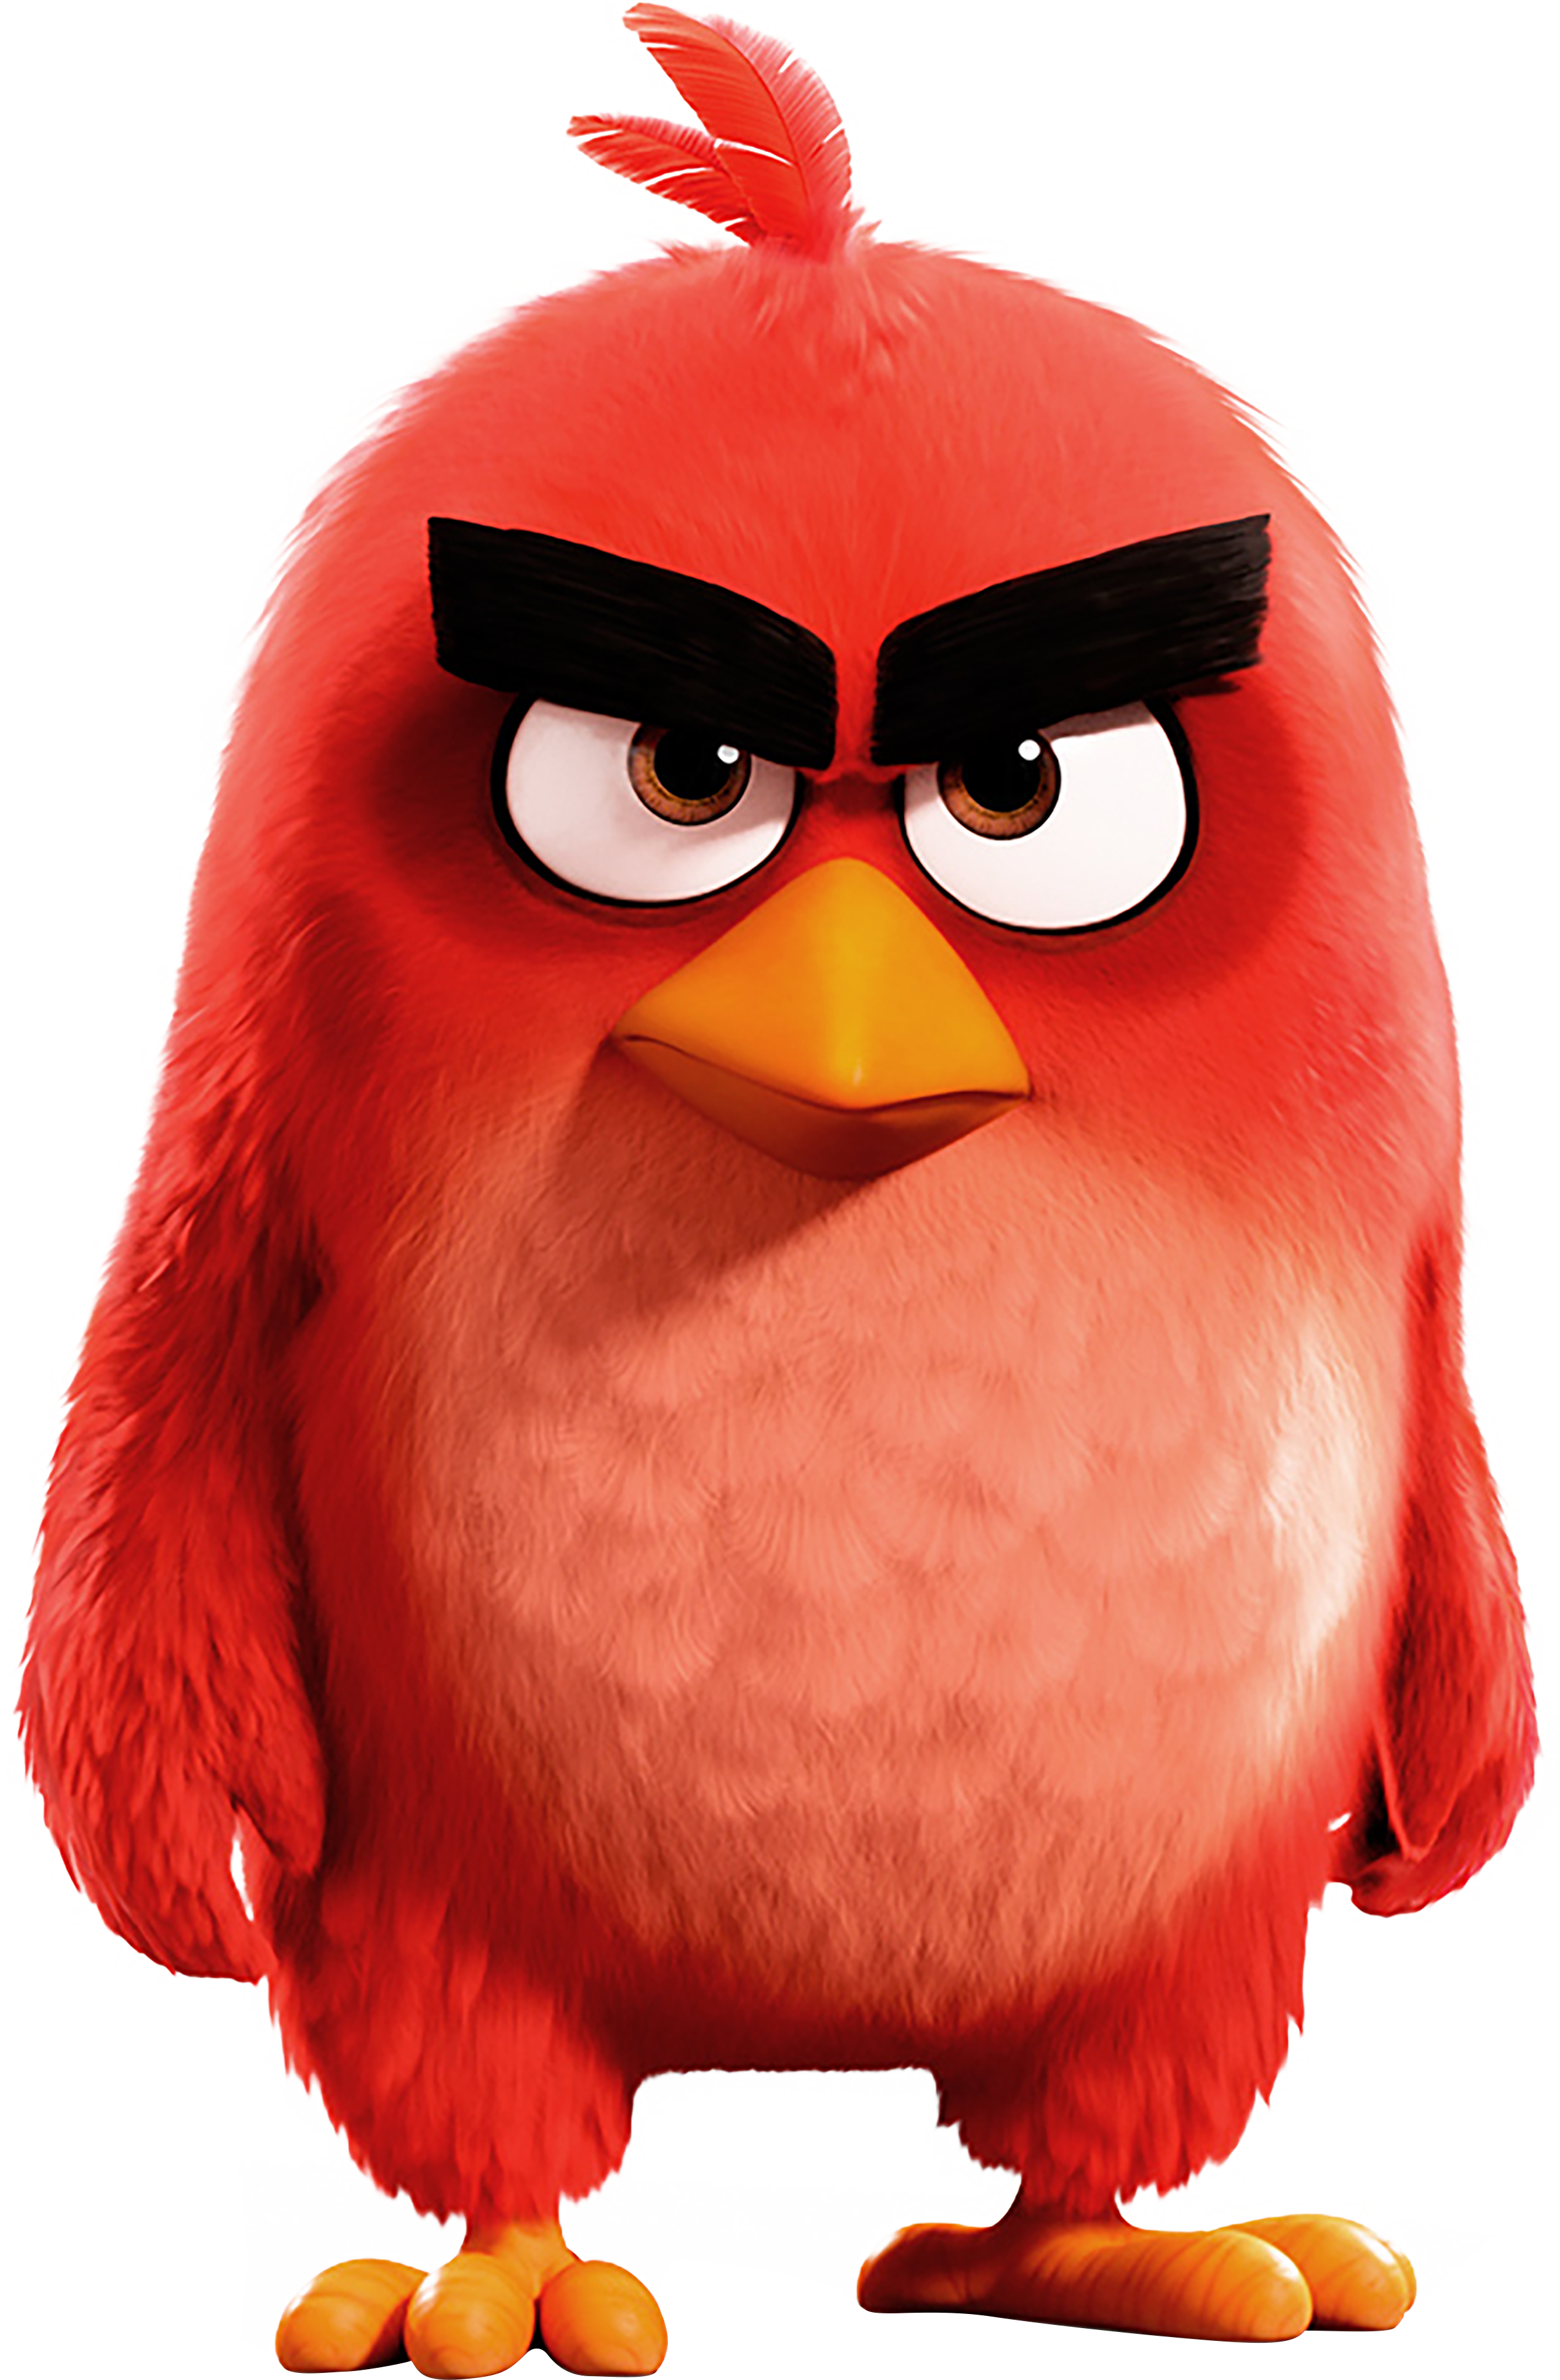 The Angry Birds Movie 2 Poster Key Art Image Wallpapers